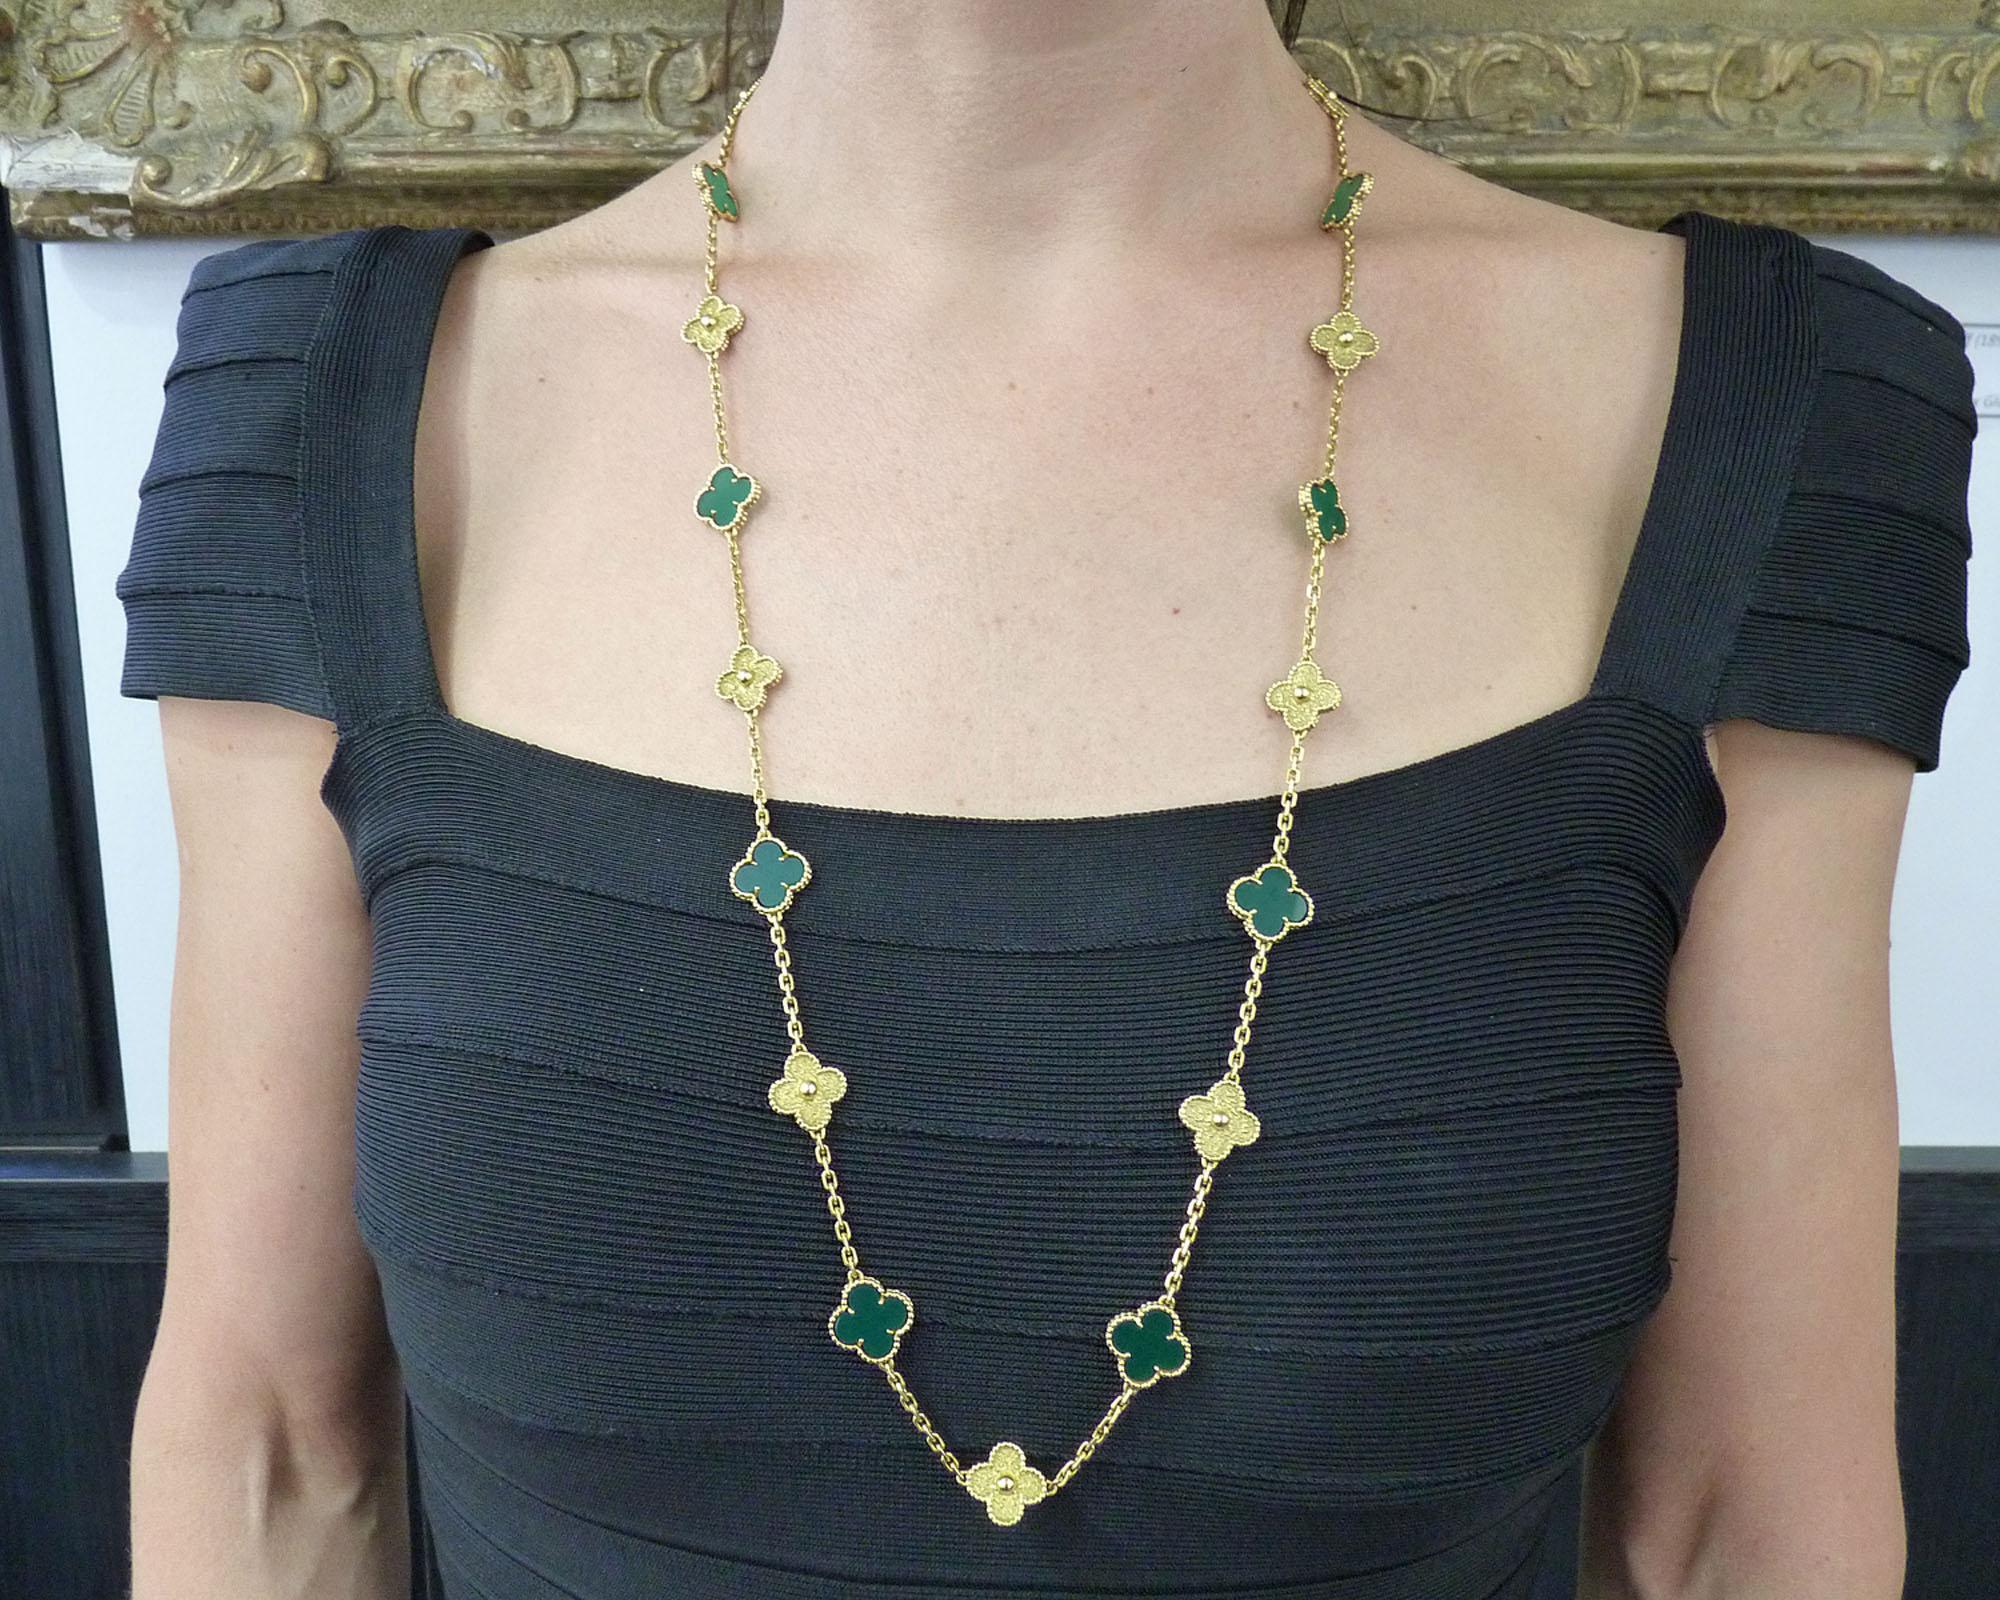 Exquisite Van Cleef & Arpels chrysophrase necklace in 18K yellow gold. 
Weight of necklace is 49.91 grams, length 32 inch. 